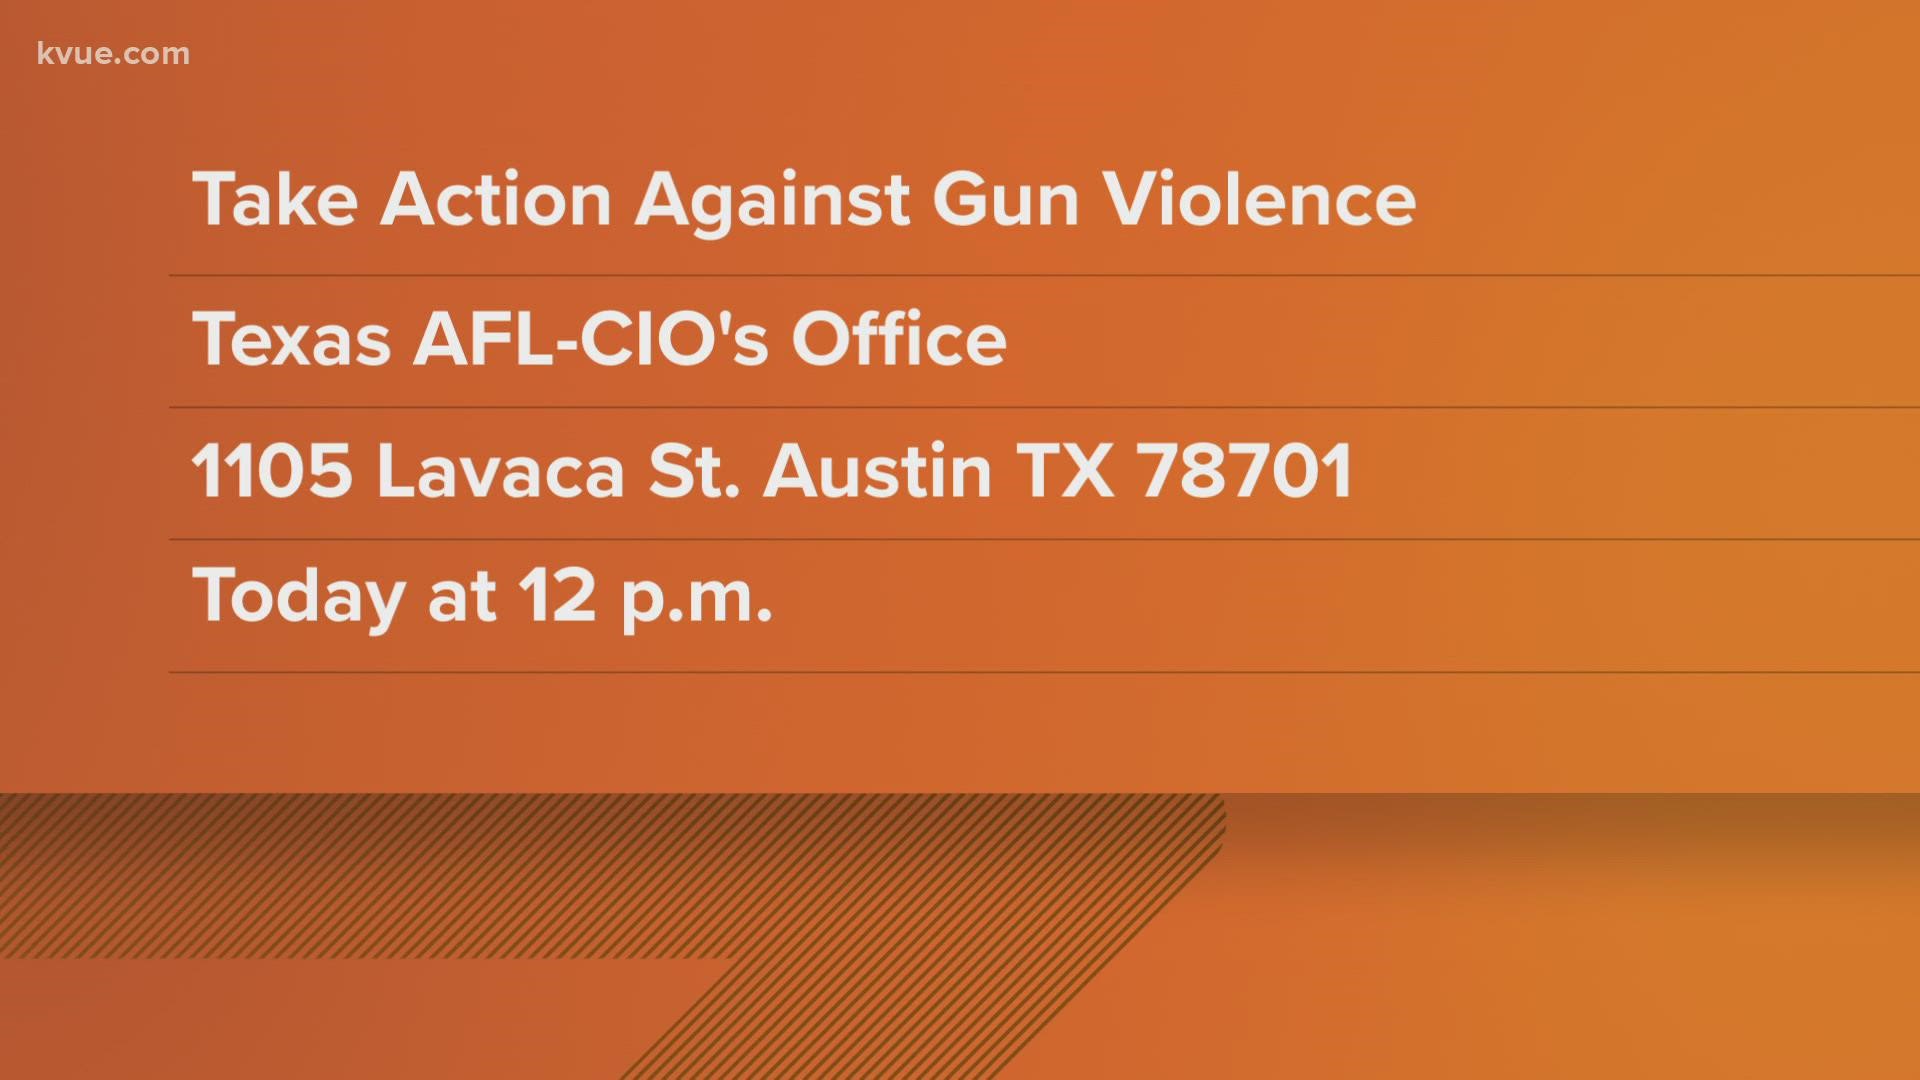 Austinites will join other parts of the country to rally for gun reform outside senators' office on Tuesday.